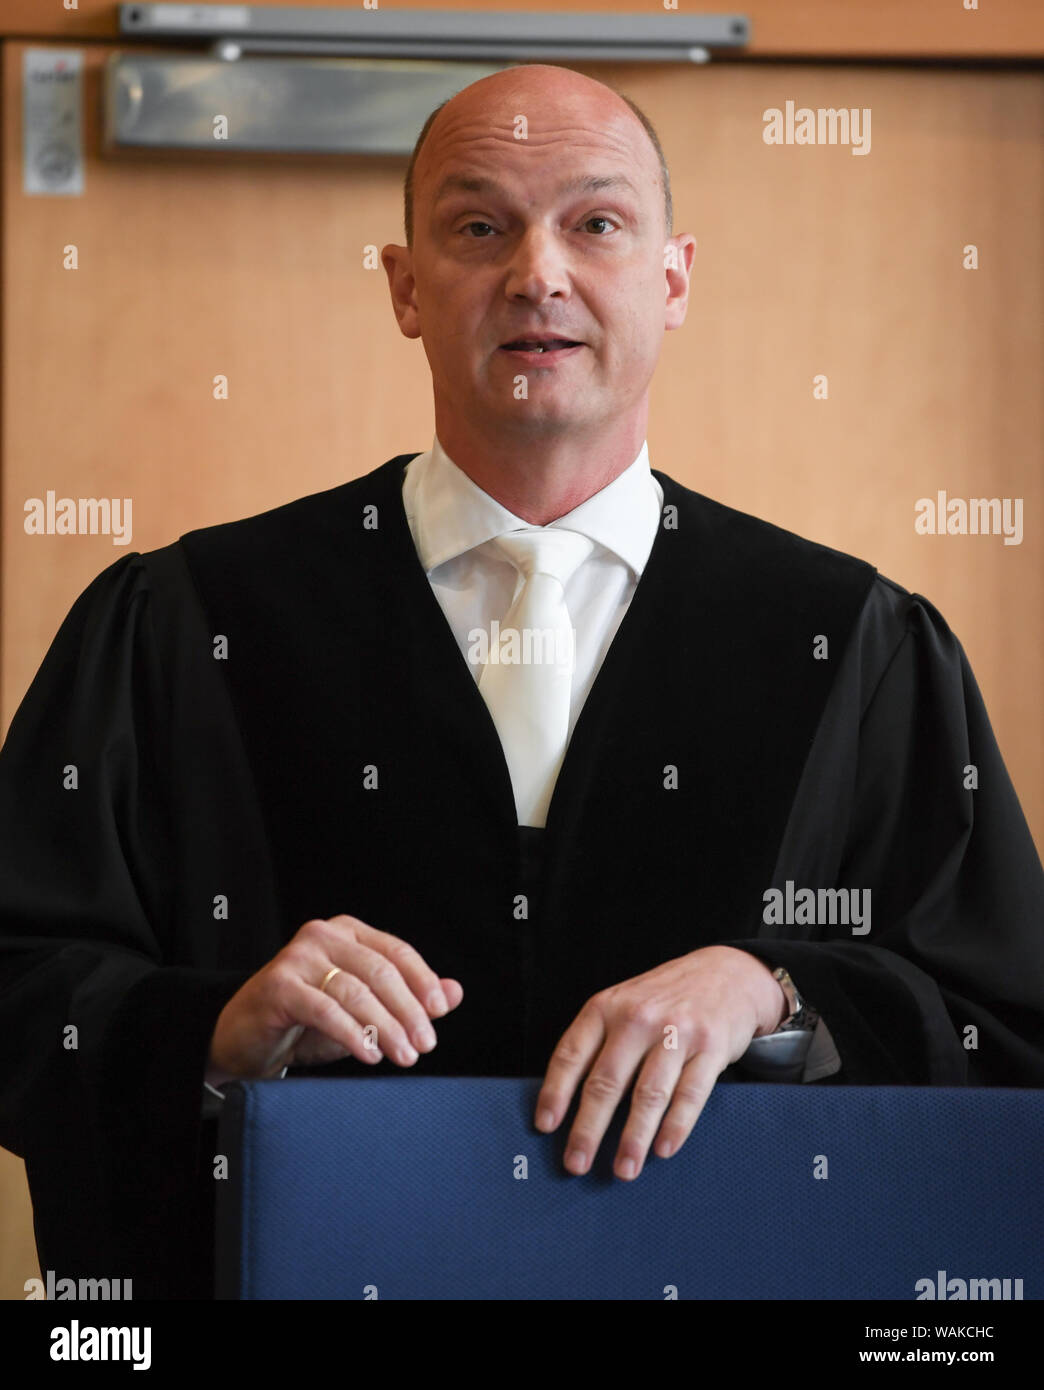 21 August 2019, Hessen, Frankfurt/Main: The presiding judge Jörn  Immerschmitt opens the trial against the entrepreneur Falk in the courtroom  of the Frankfurt Regional Court. The public prosecutor's office accuses the  50-year-old